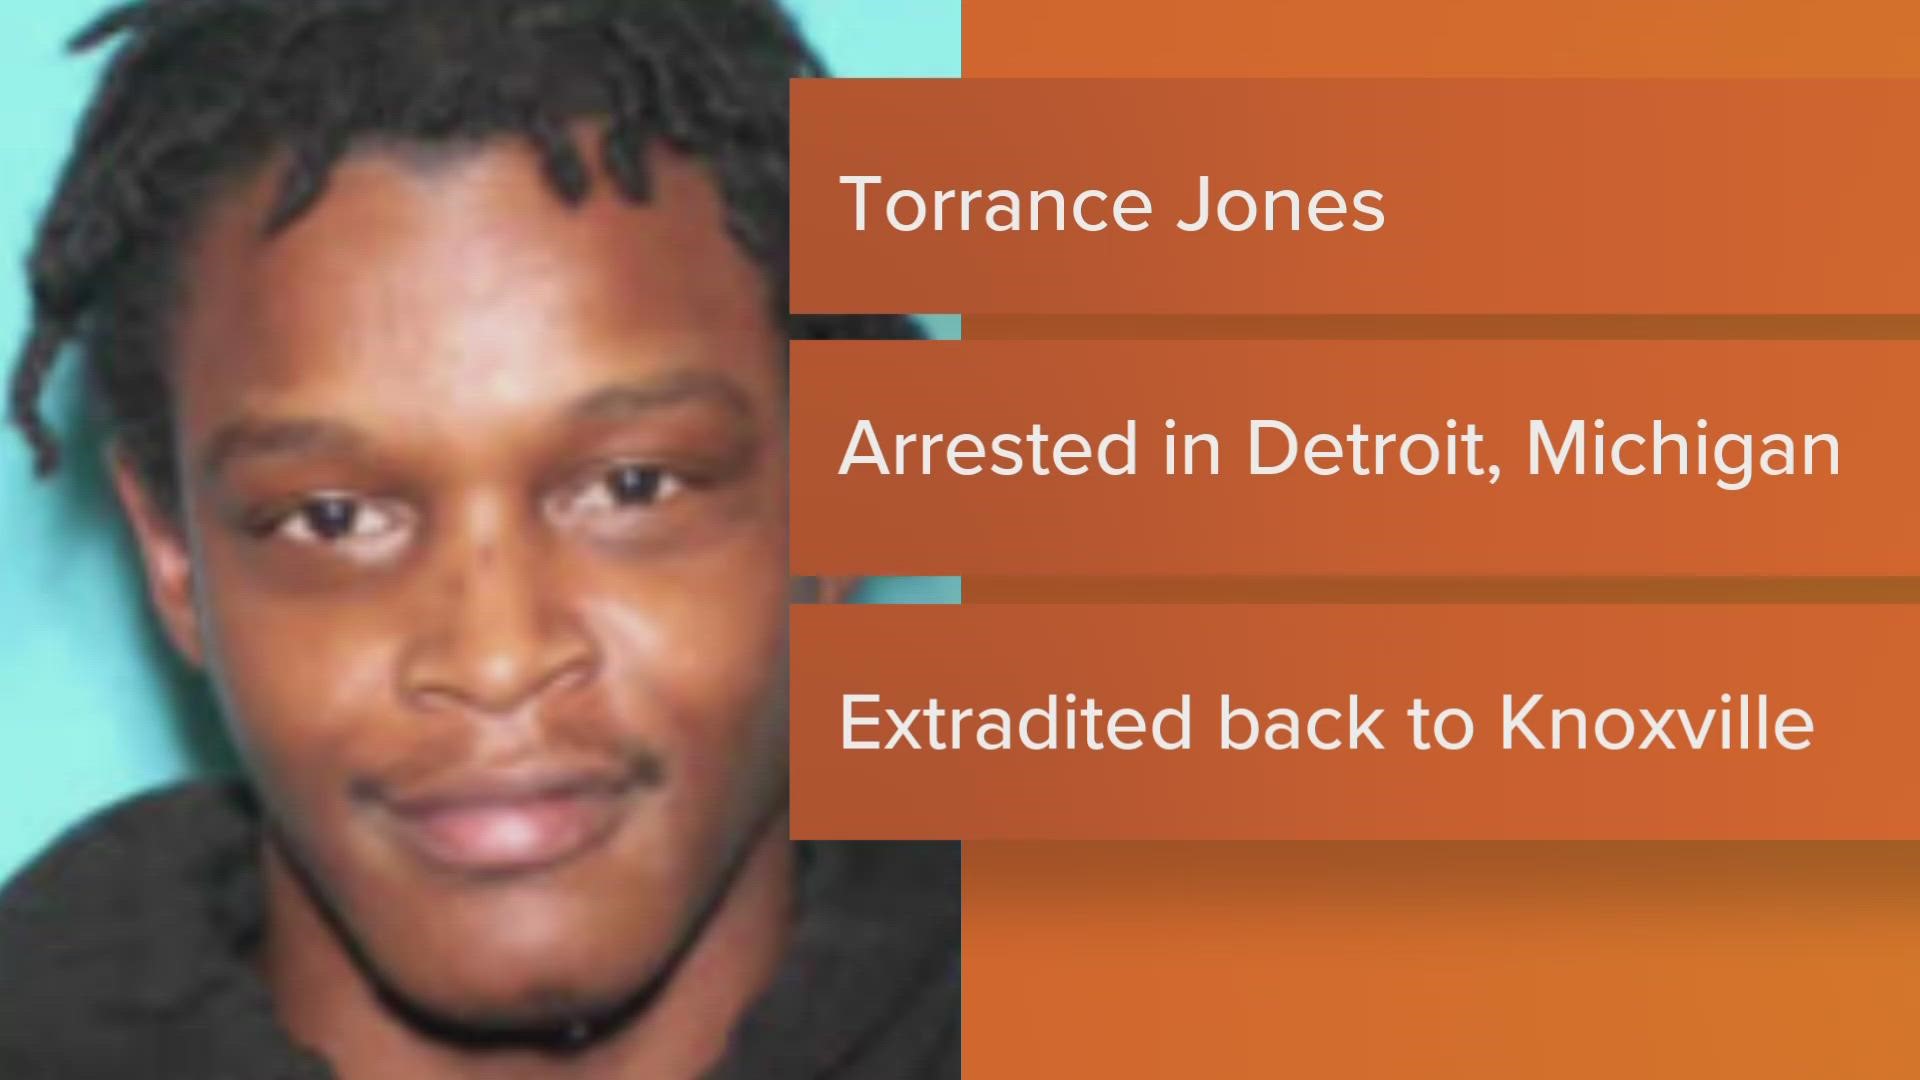 The Knoxville Police Department said Torrance Jones will soon be extradited back to Knoxville.